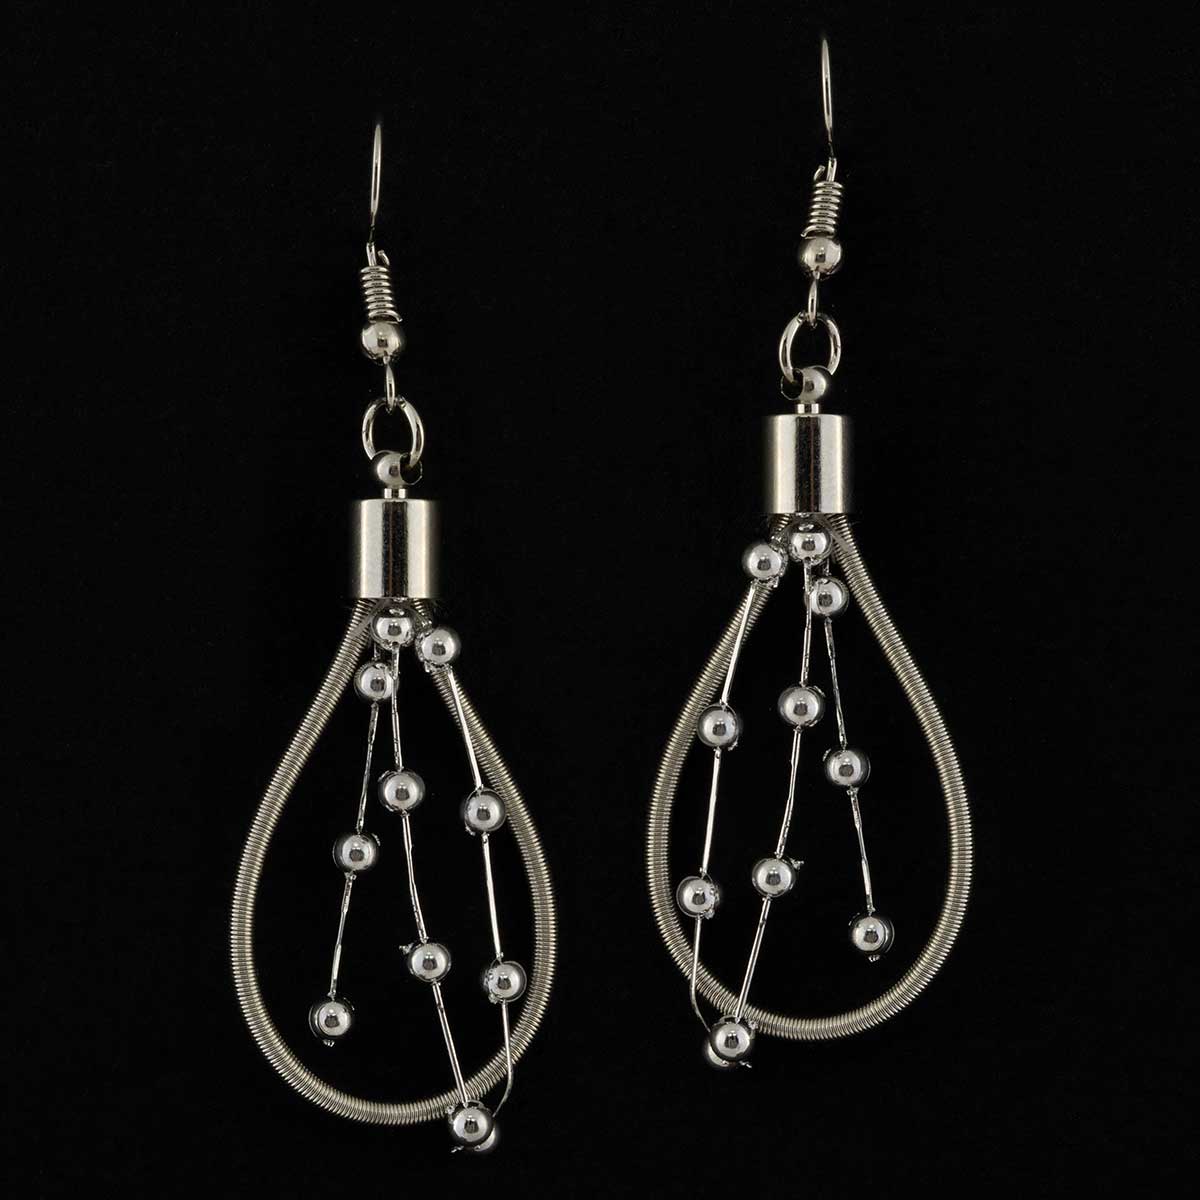 Silver Coil with Beads Dangle French Wire Earrings 1"x2.25"